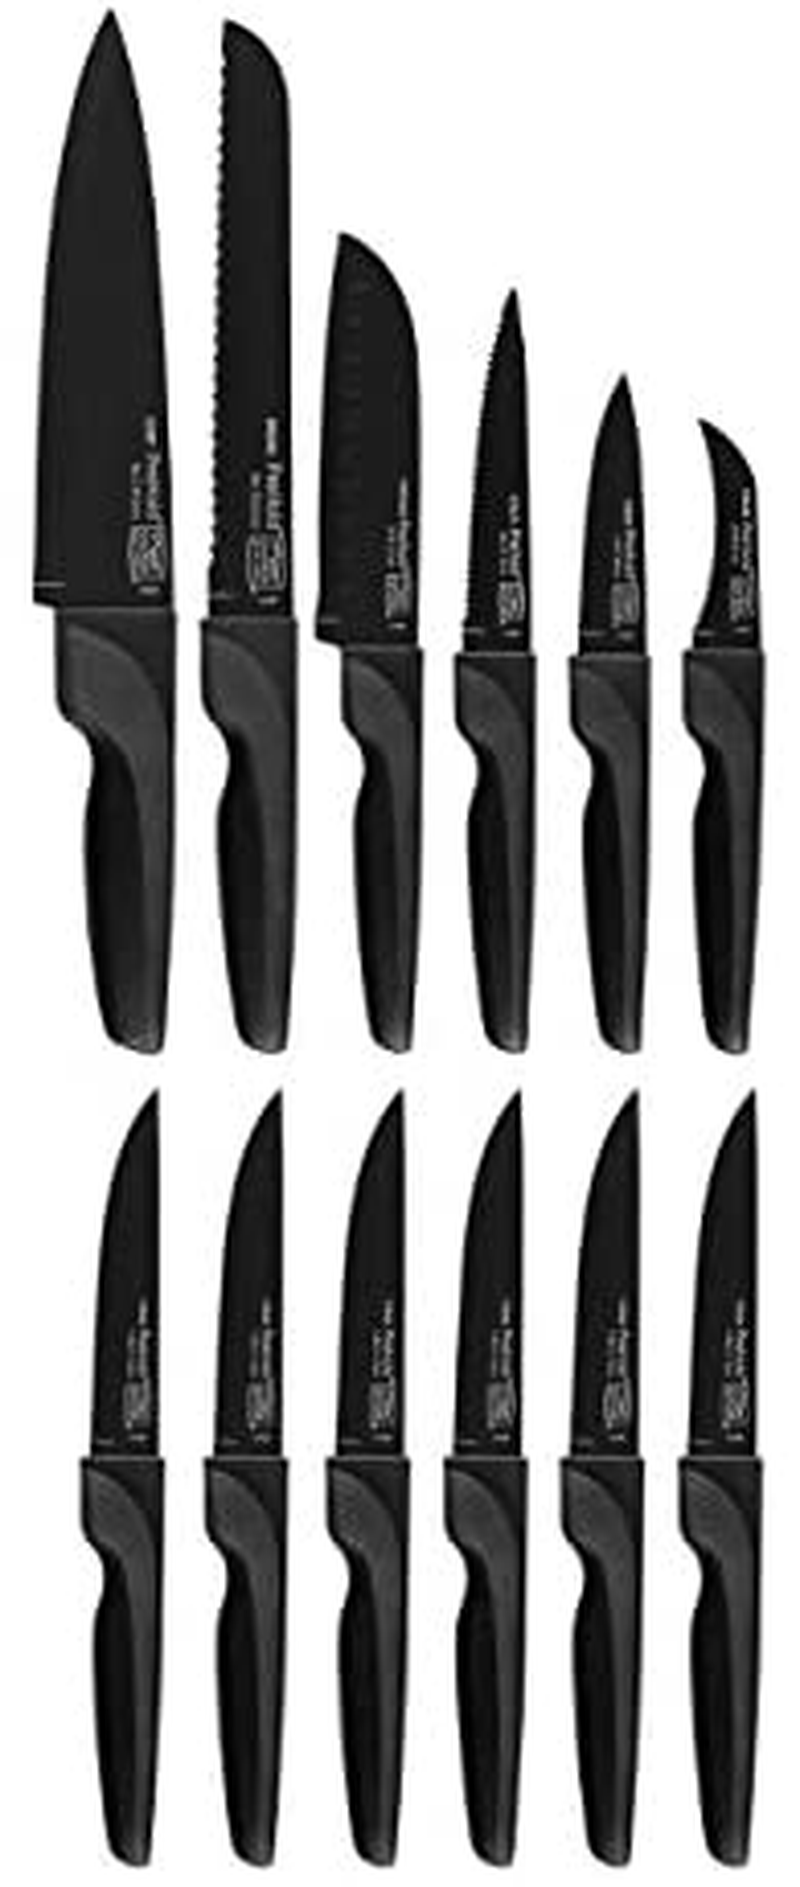 Chicago Cutlery ProHold Dual Knife Block Set with Non-Stick Coating (14-Piece)